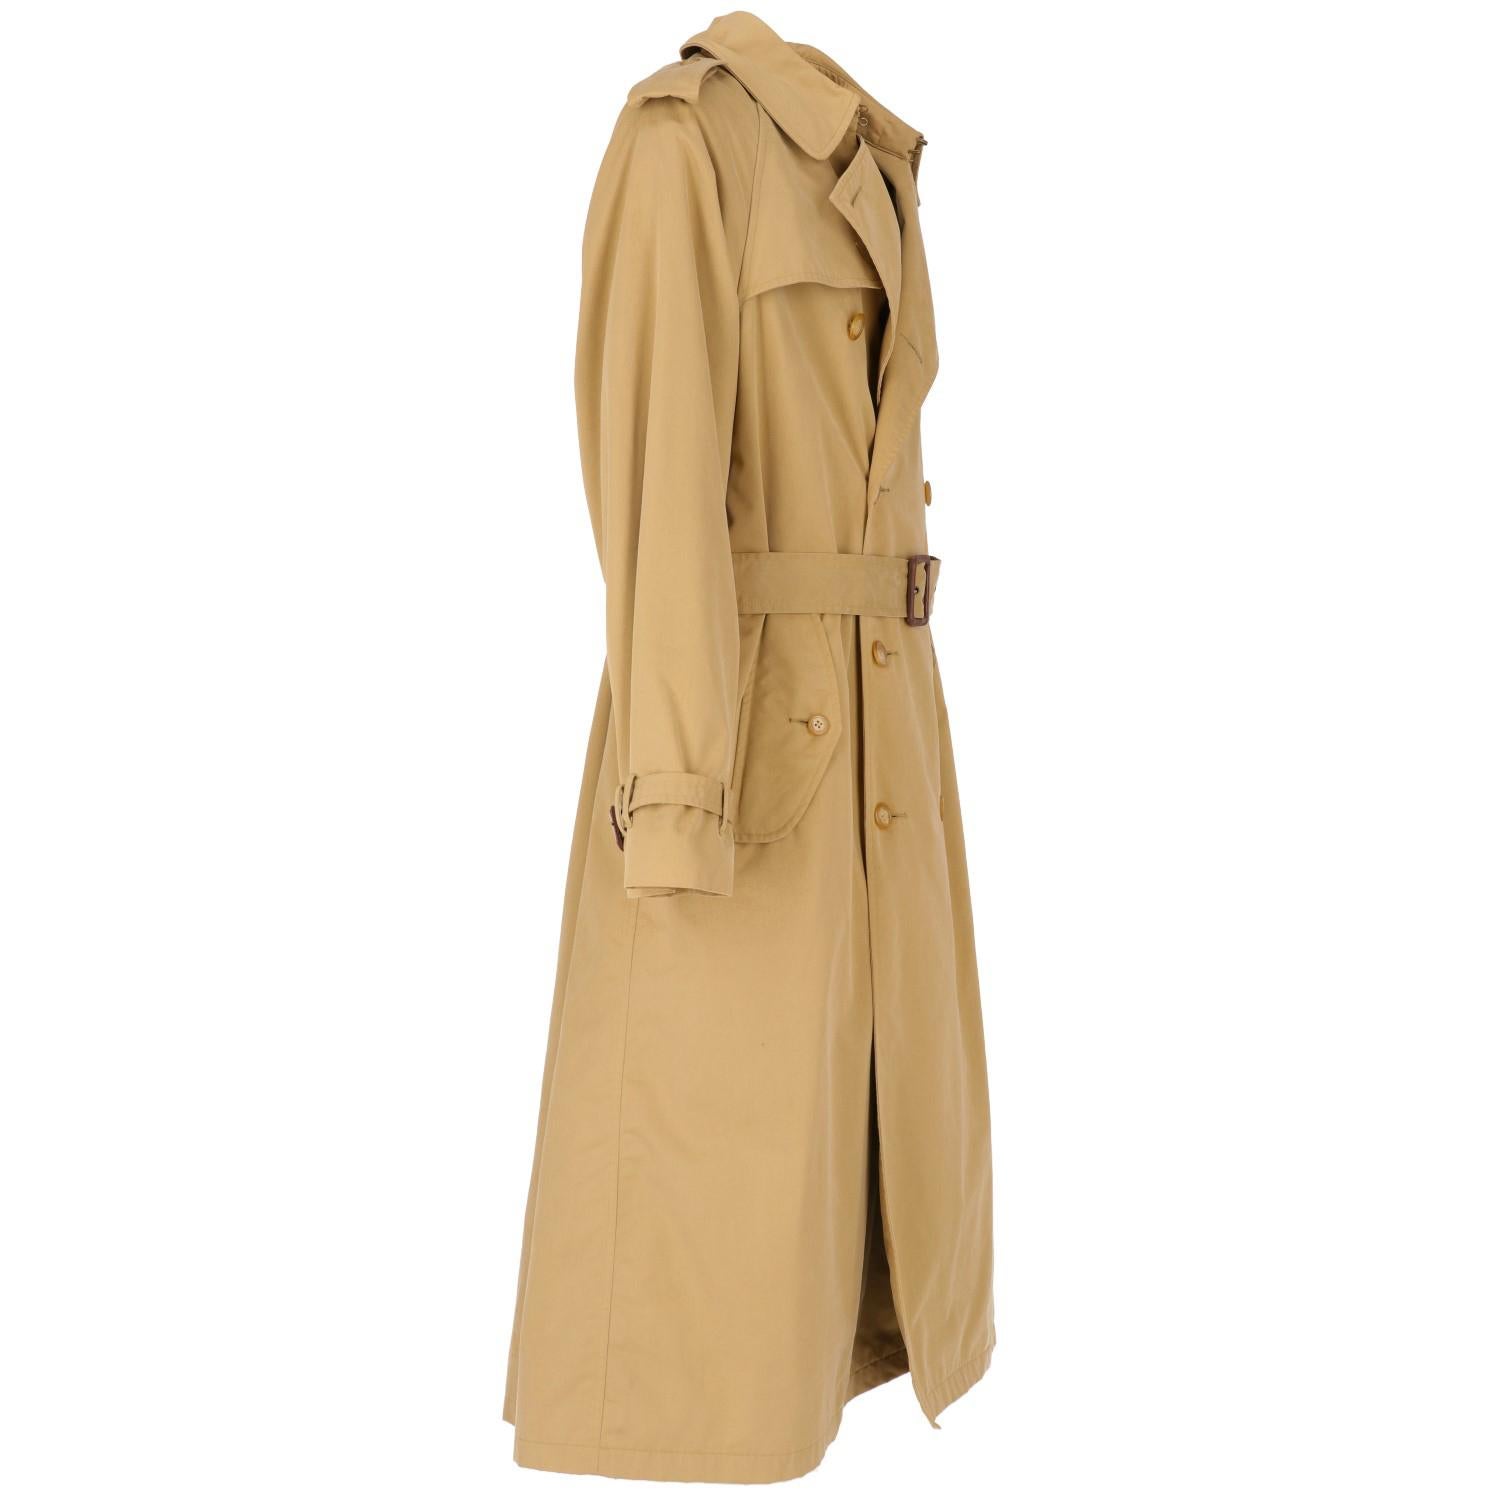 Classy Polo by Ralph Lauren trench coat for the elegant man. In beige blend cotton, with tartan lining and a second removable blend wool lining . The item is vintage it was produced in the 90s and is in good conditions, but shows light sign of wear,